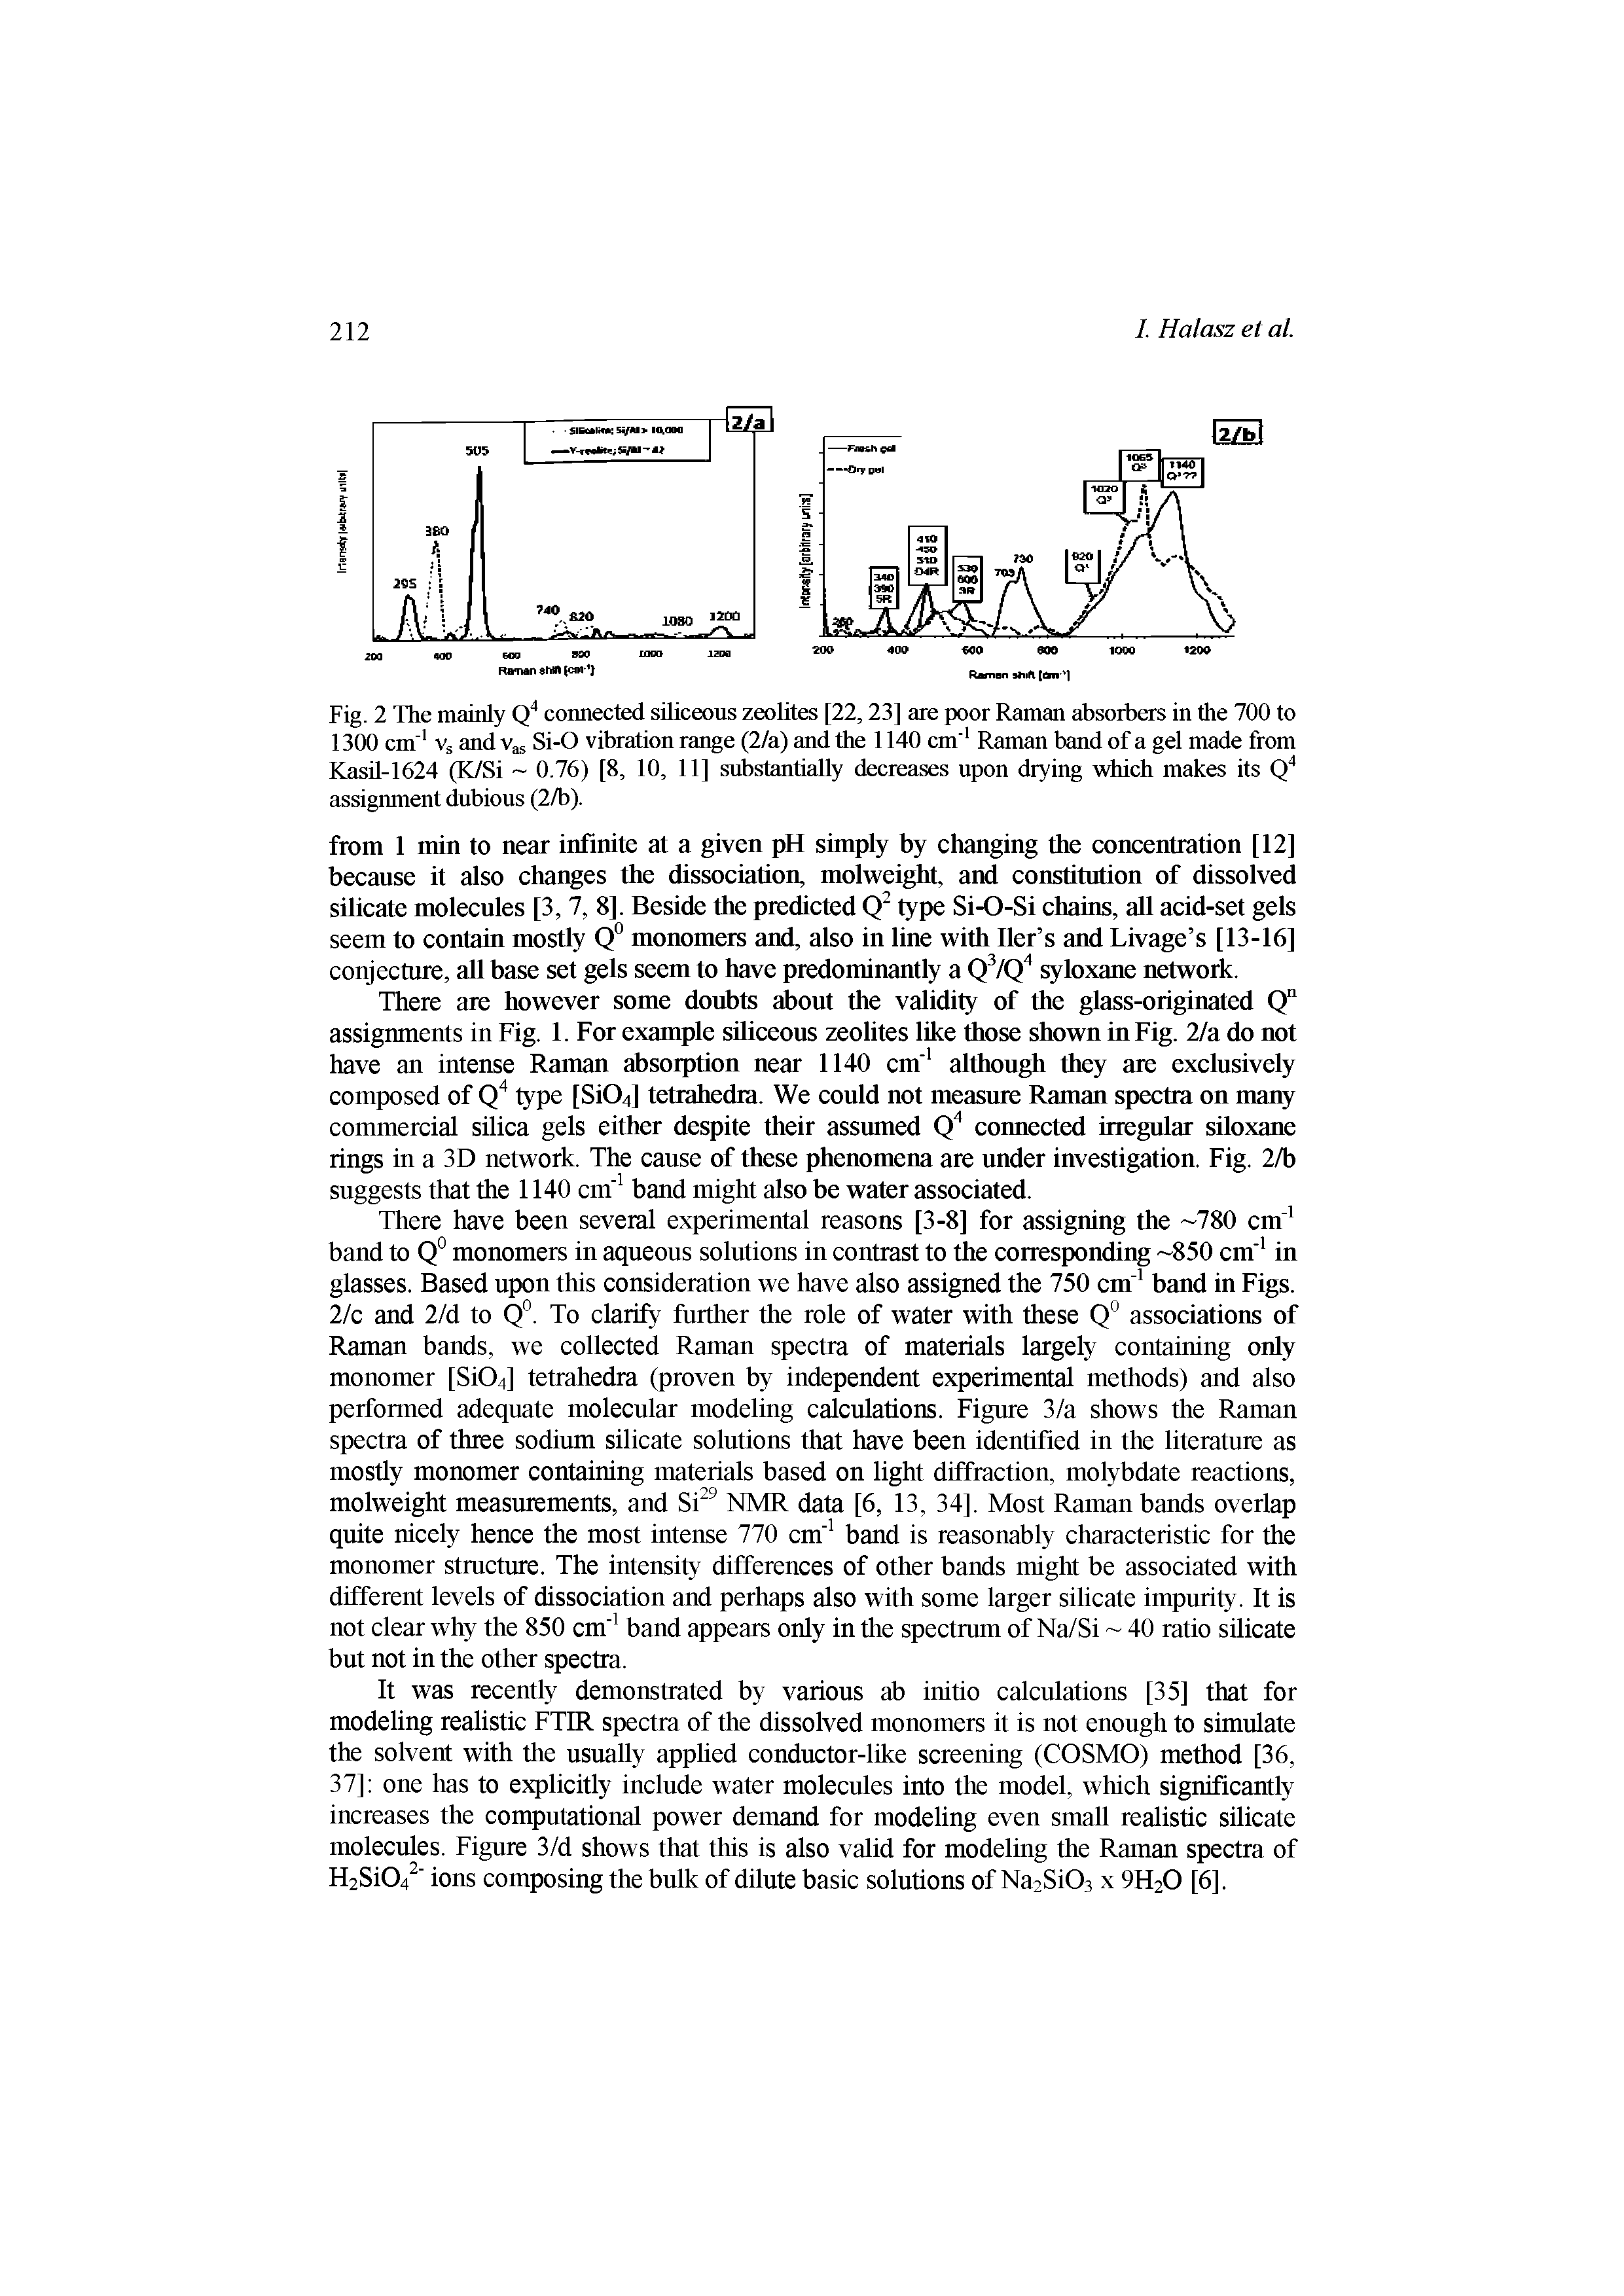 Fig. 2 The mainly Q connected siliceous zeolites [22,23] are poor Raman absorbers in the 700 to 1300 cm" Vs and Vas Si-O vibration range (2/a) and the 1140 cm Raman band of a gel made from Kasil-1624 (K/Si 0.76) [8, 10, 11] substantially decreases upon drying which makes its Q assignment dubious (lib).